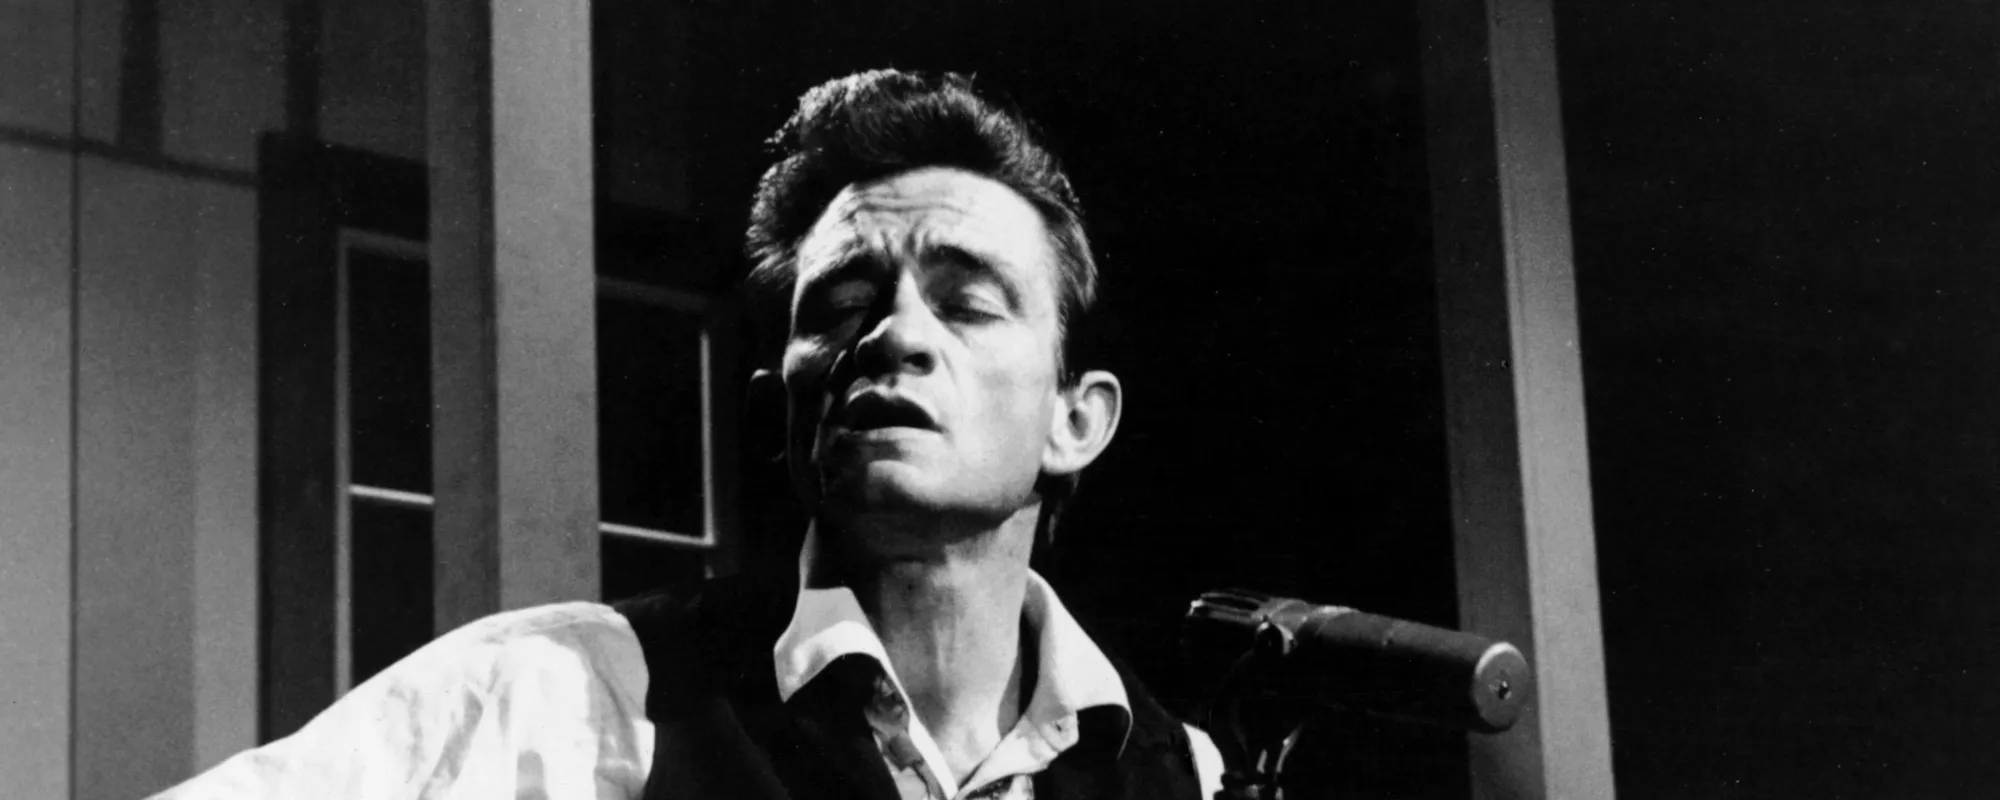 Grand Ole Opry to Honor Johnny Cash on 20th Anniversary of His Death